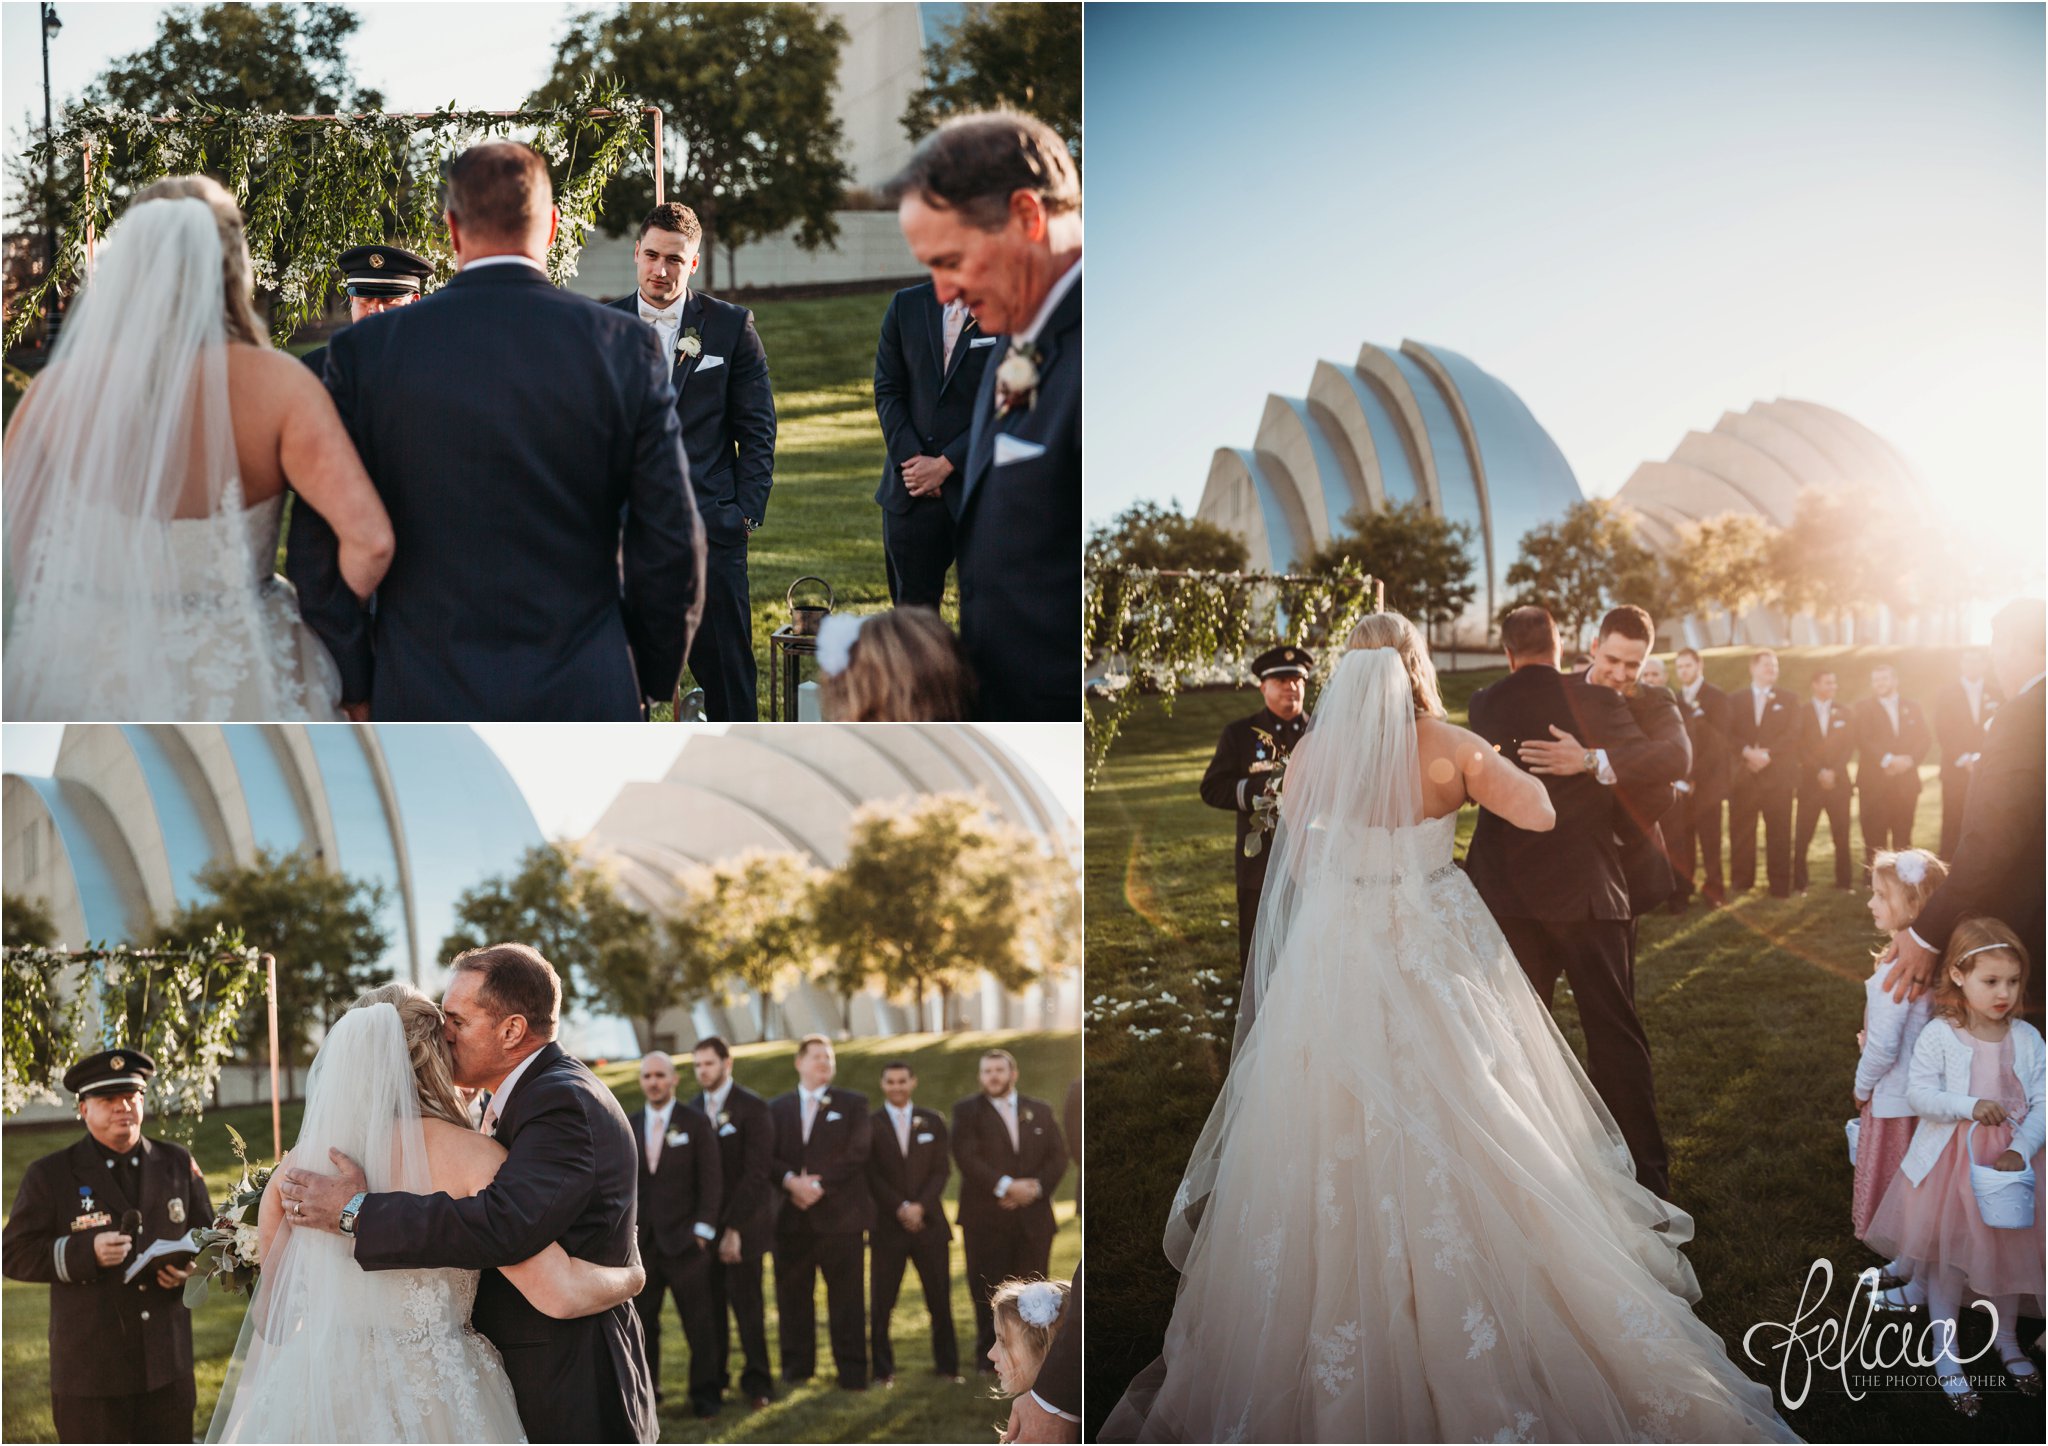 images by feliciathephotographer.com | wedding photographer | downtown kansas city | outdoor ceremony | walking down the aisle | father giving away daughter | kauffman ceremony | bohemian glam | light pink | flower girls | romantic | 